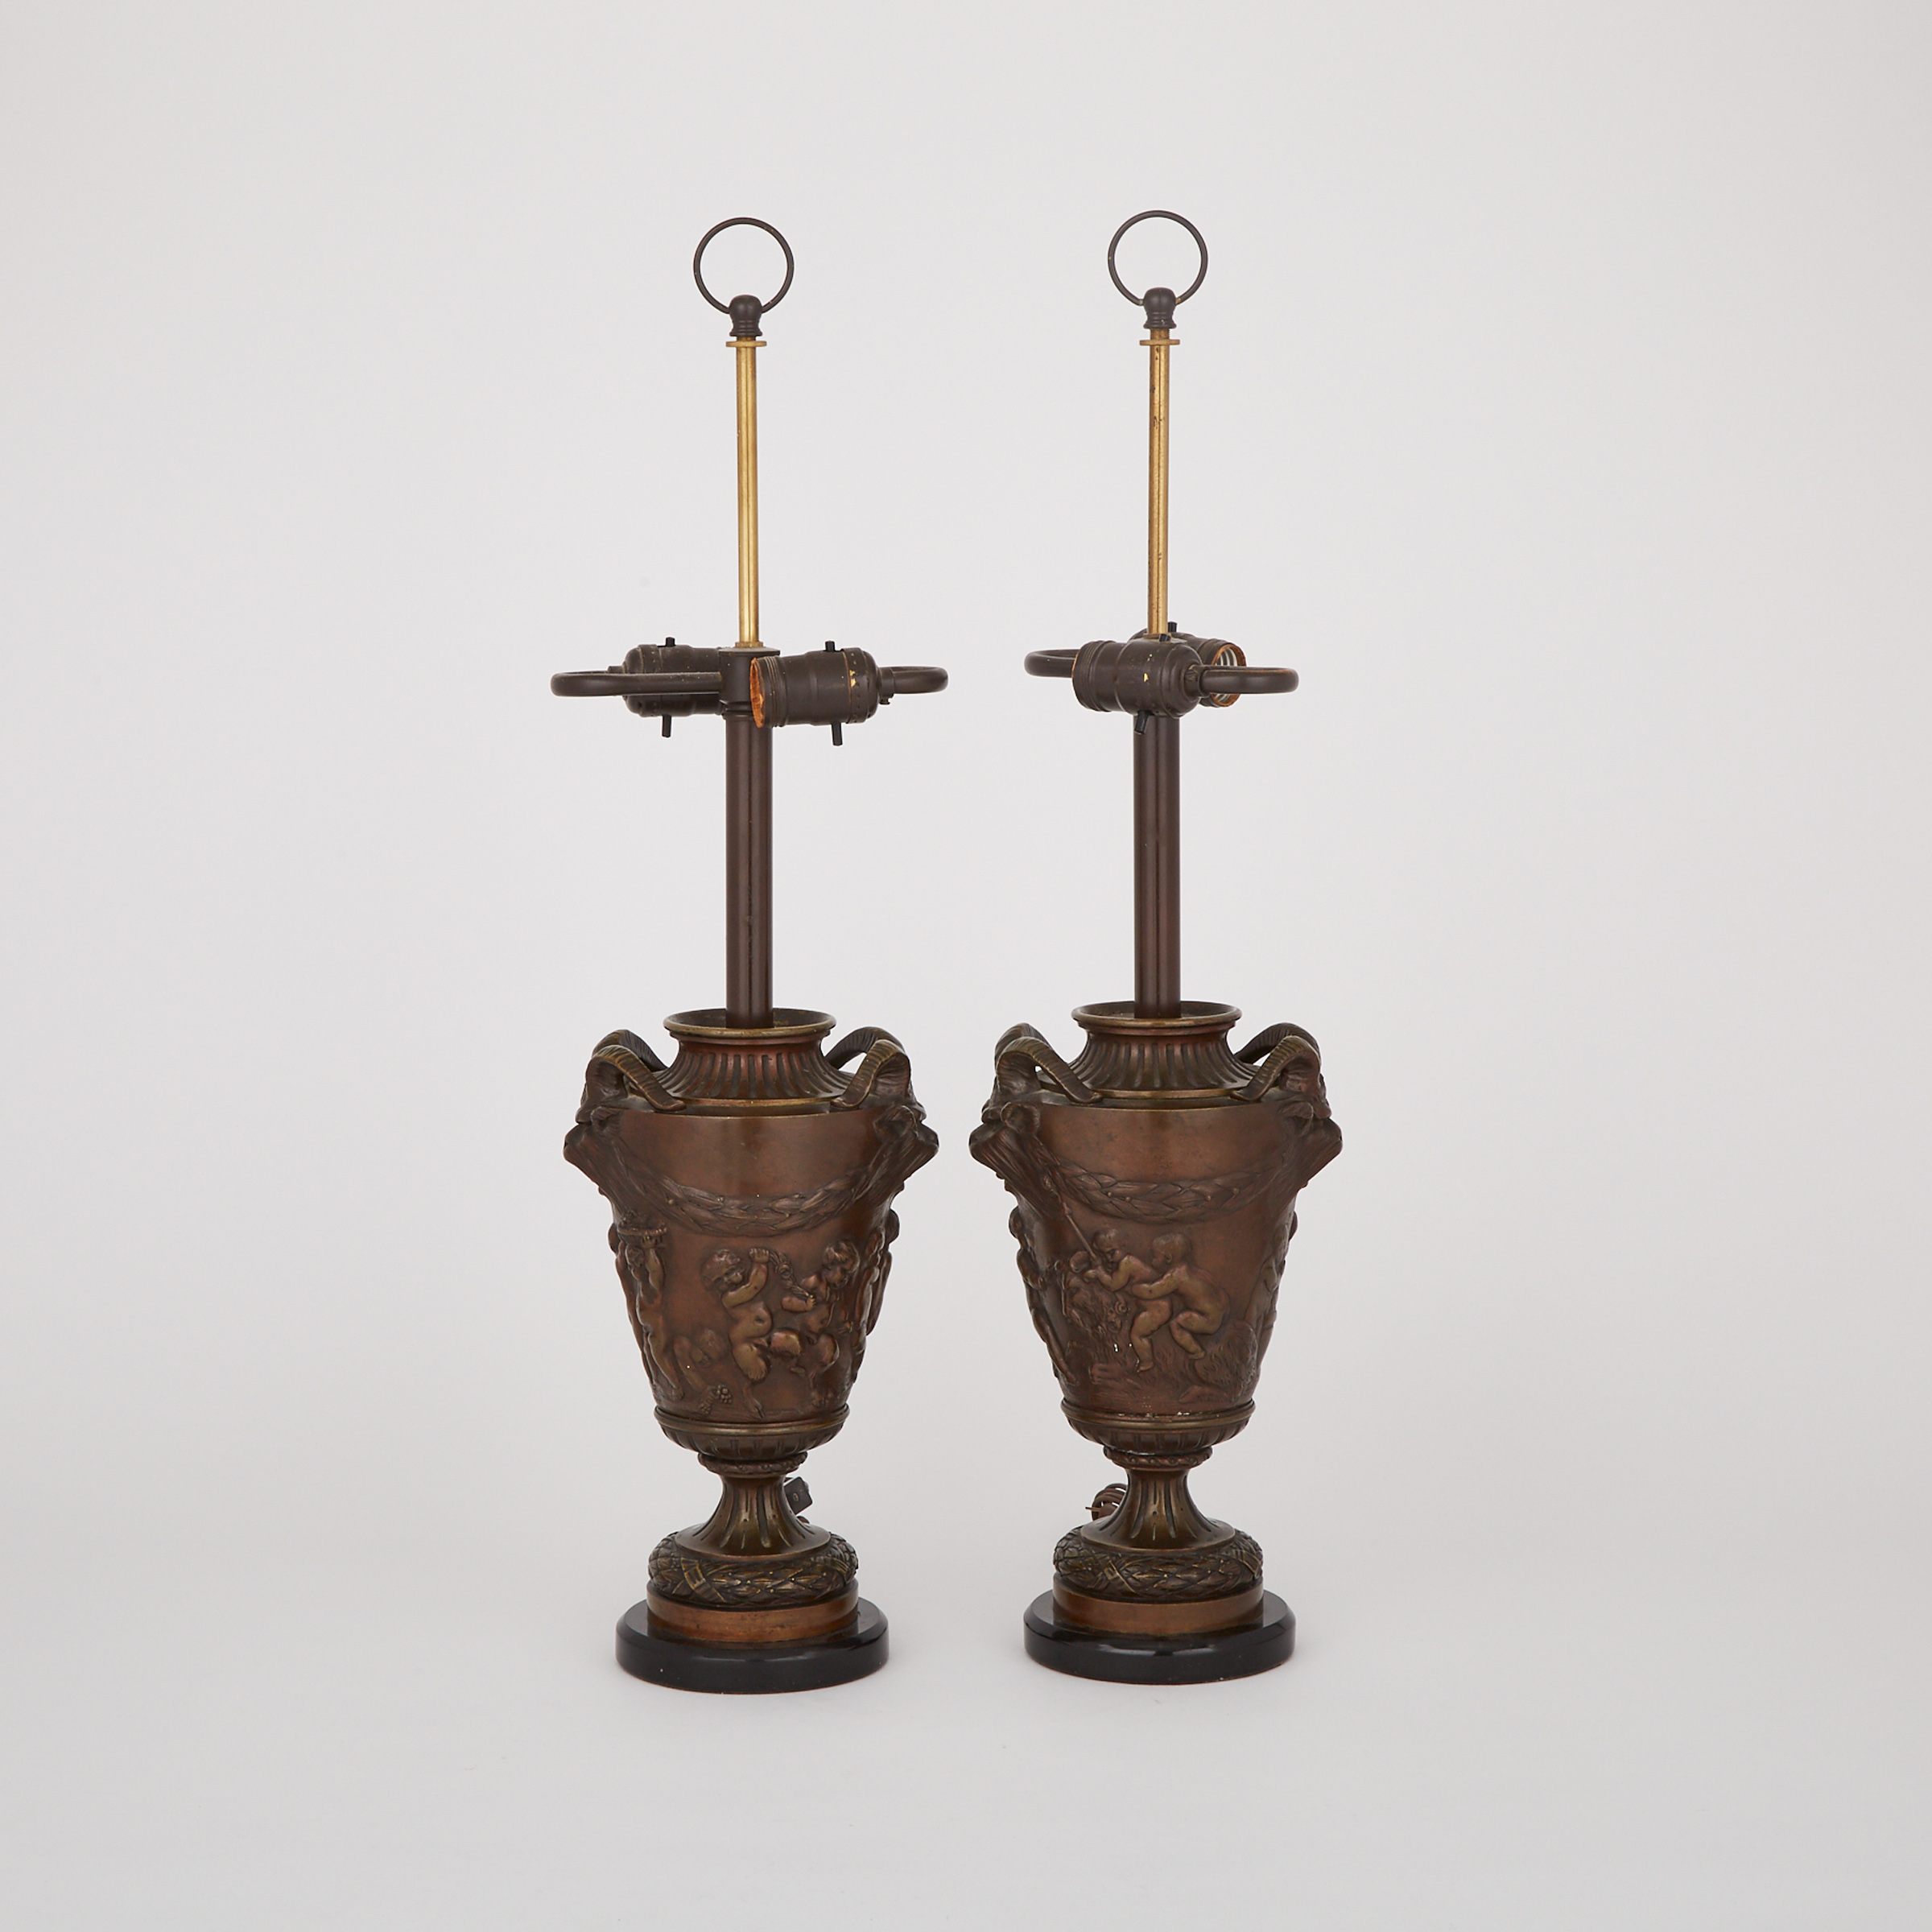 Pair of French Neoclassical Patinated Bronze Urn Form Table Lamps, 19th/early 20th century